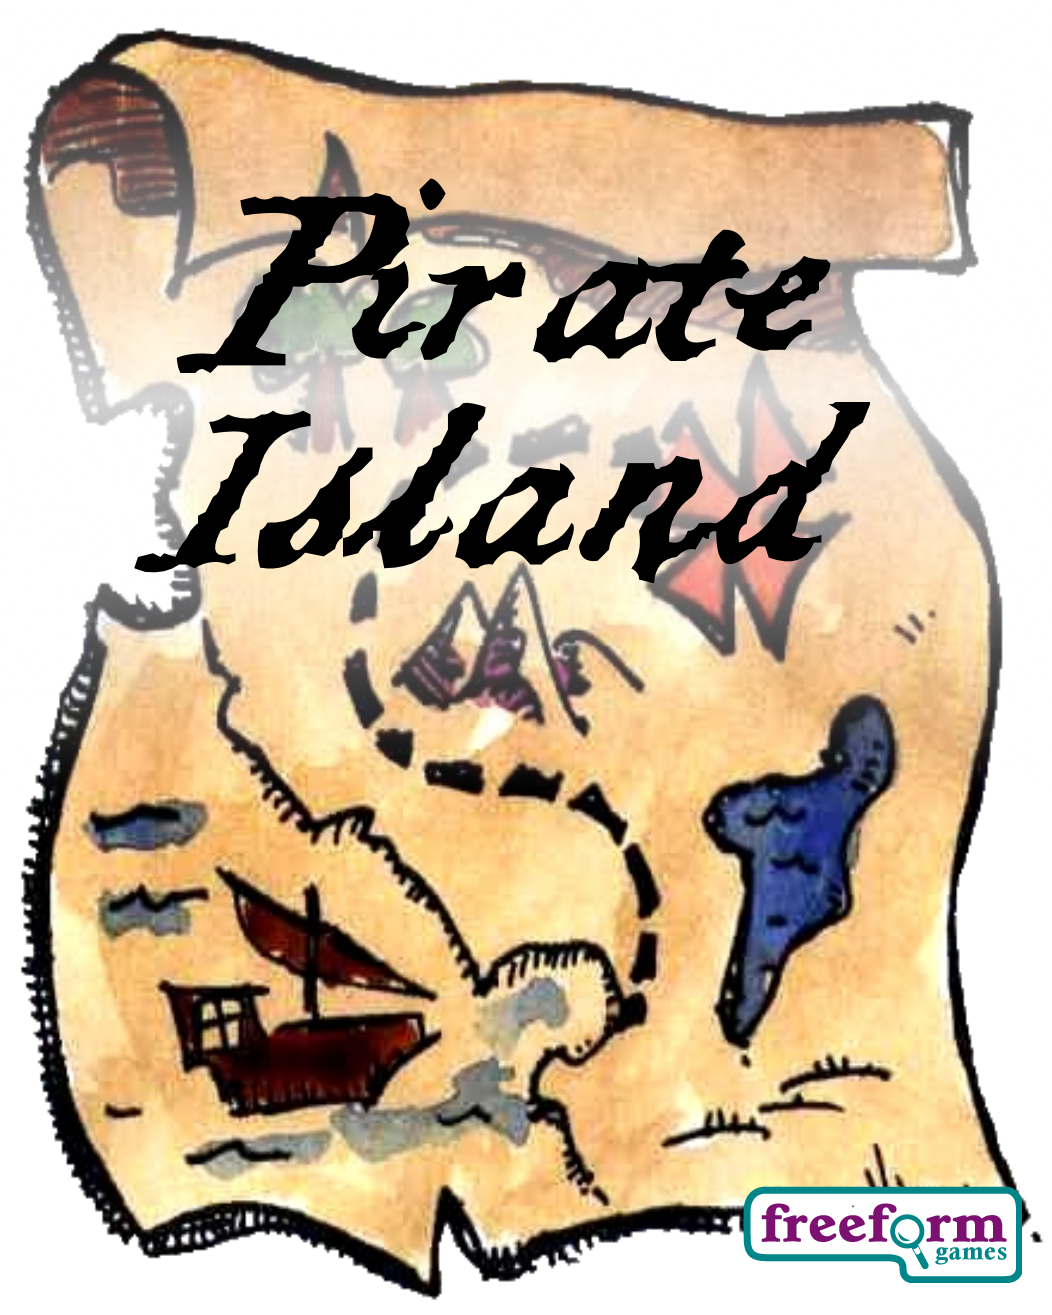 Pirate Island – a kids' party game